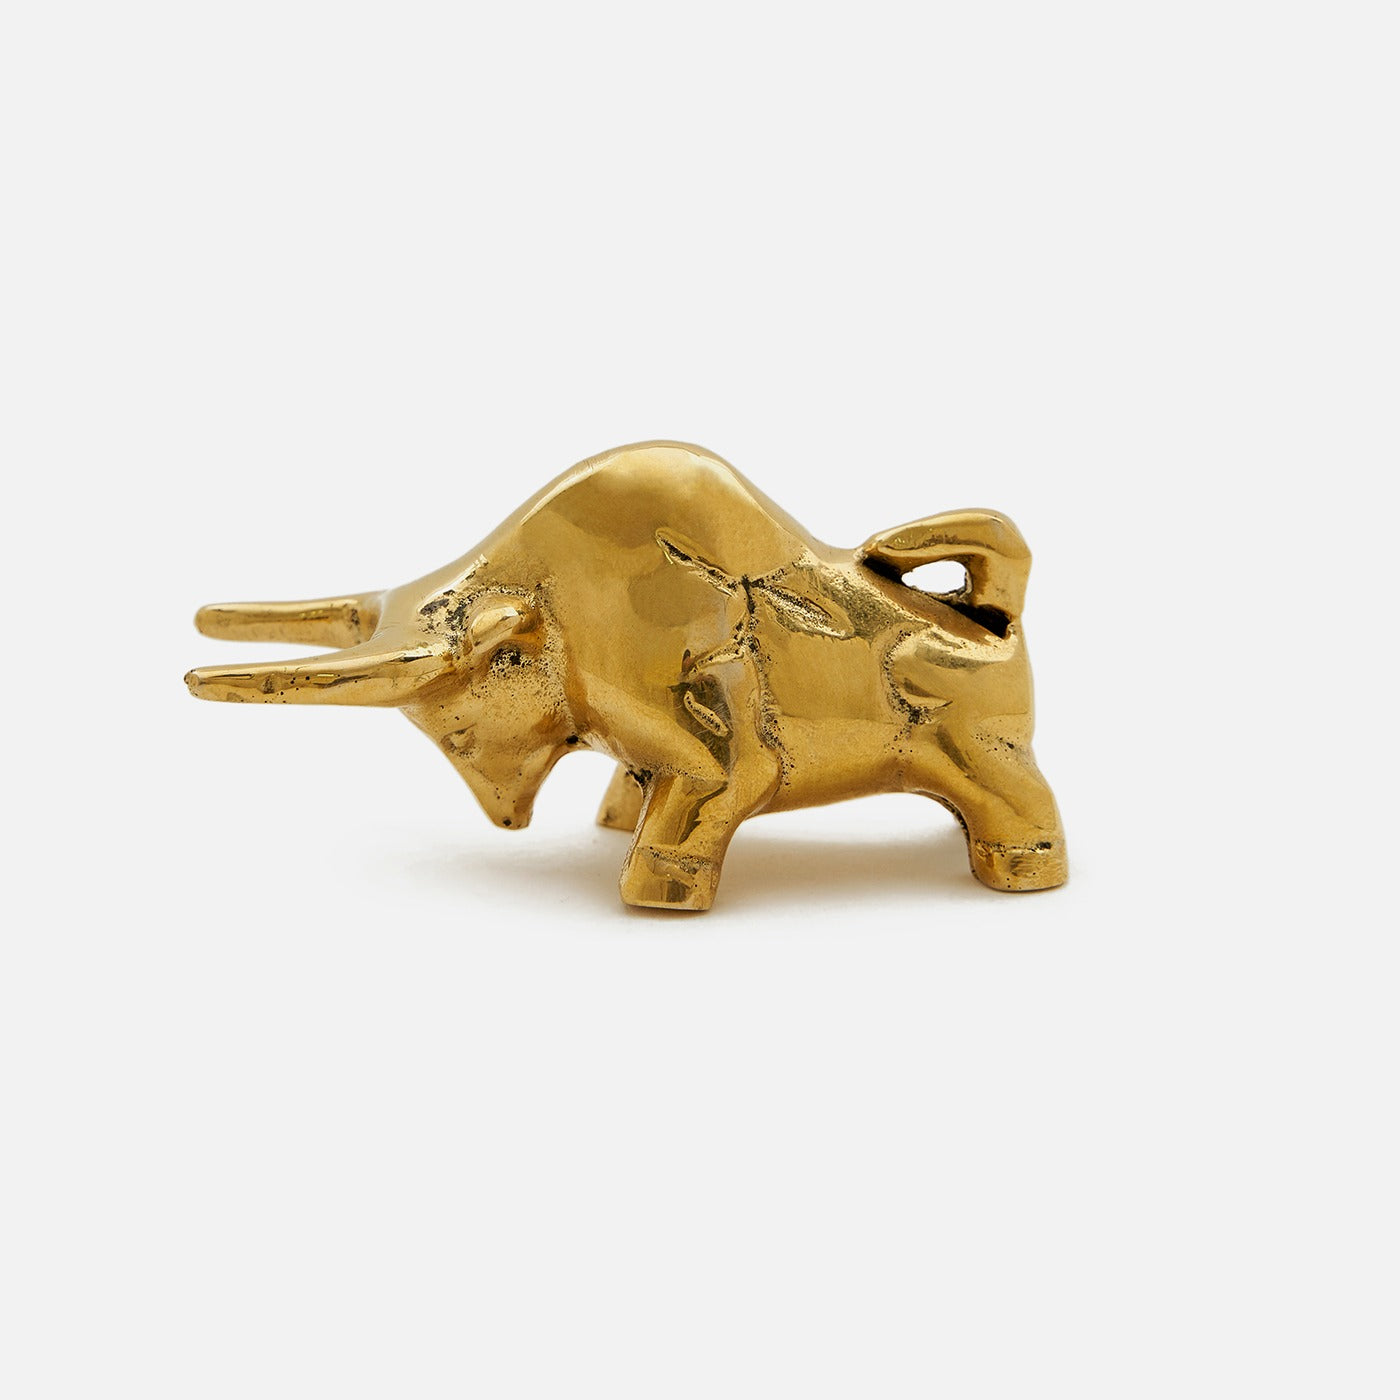 Handcrafted Brass Bull Statue Wall Street - Decoration for Bookshelf, Bedroom & Office.